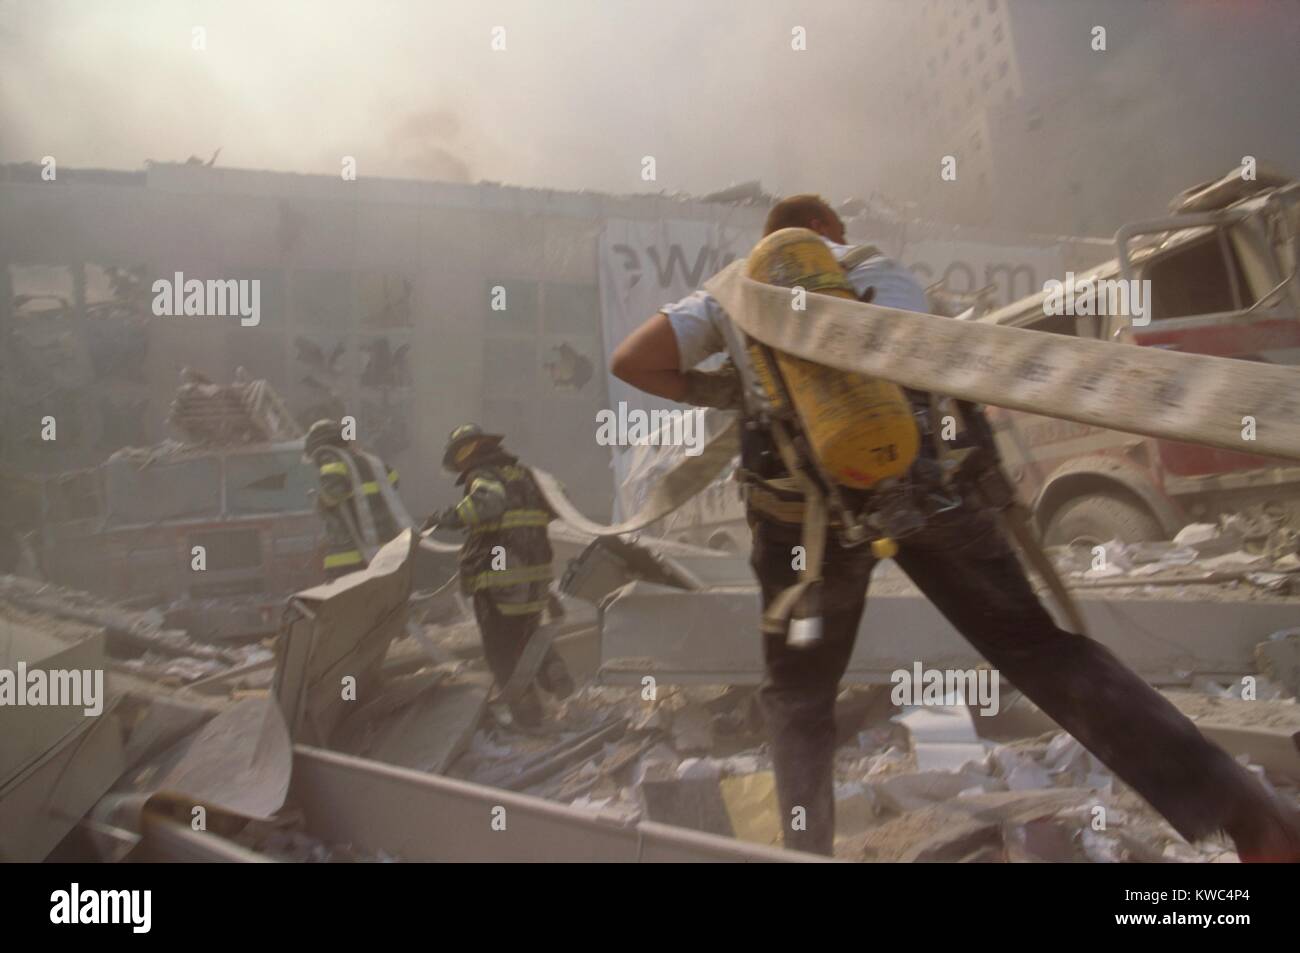 Fire fighters hauling a hose through rubble on September 11th, following terrorist attack on World Trade Center. The nearest structure is a pedestrian bridge over the West Side Highway (West St.) that connected the WTC 1 (North Tower) with the World Financial Center and Battery Park City. New York City, Sept. 11, 2001. (BSLOC 2015 2 45) Stock Photo